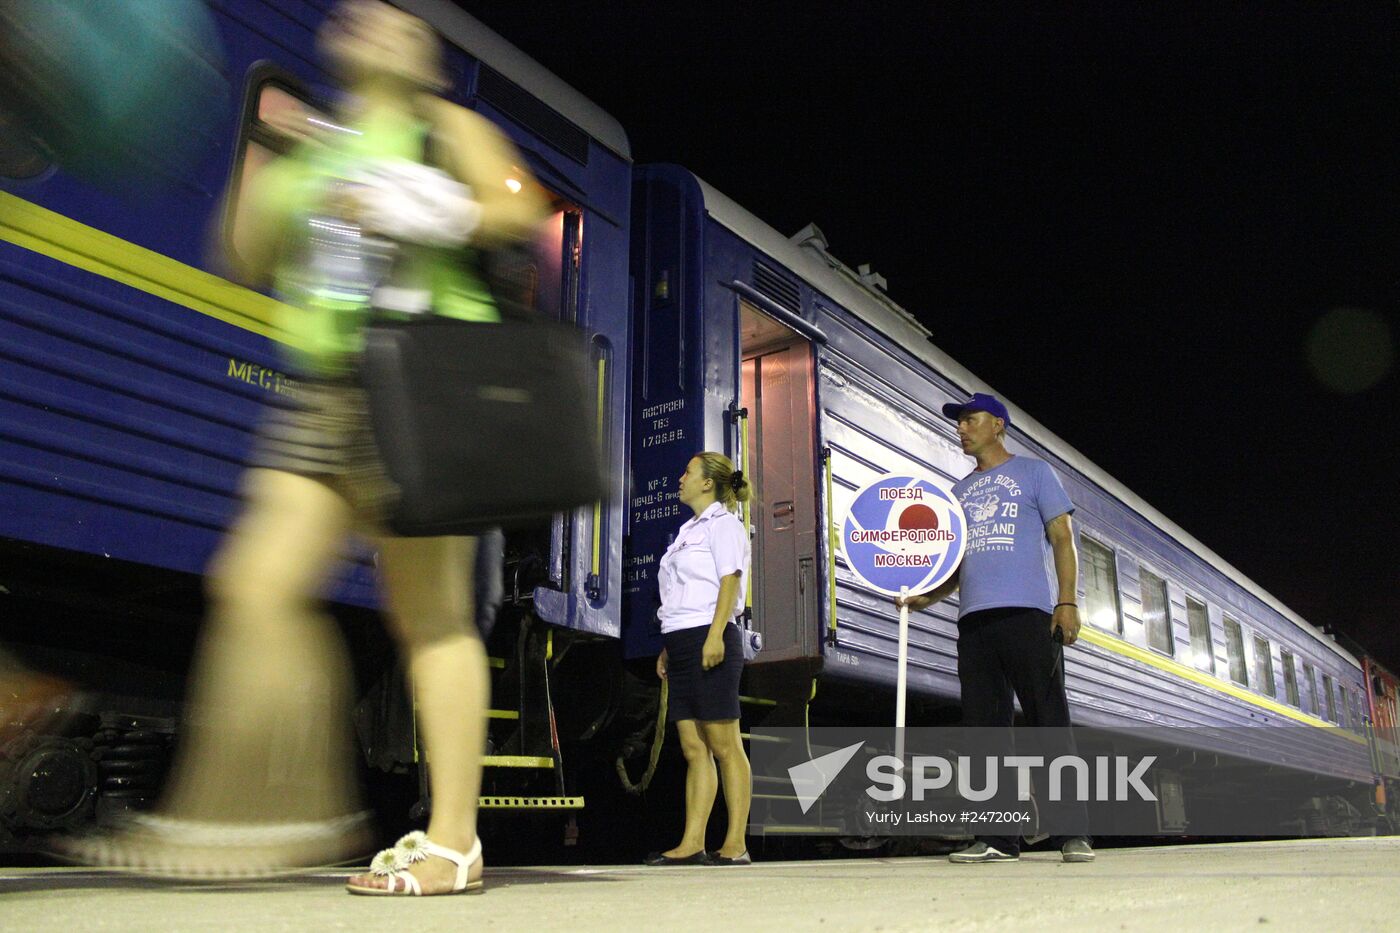 Simferopol-to-Moscow train at Kerch ferry crossing